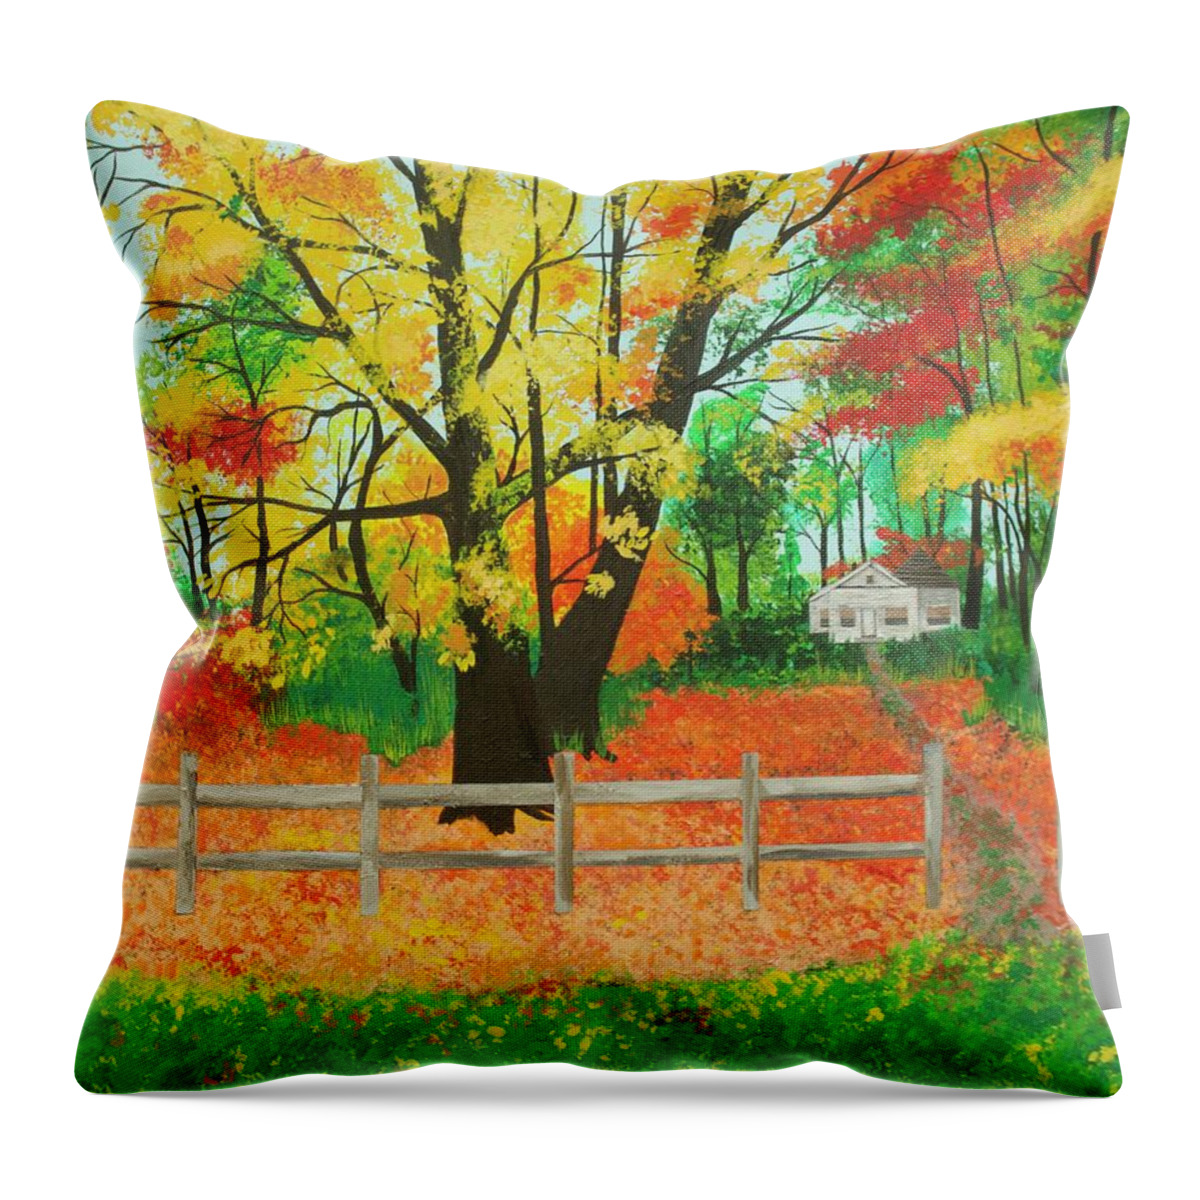 Autumn Throw Pillow featuring the painting House In The Woods by Rollin Kocsis